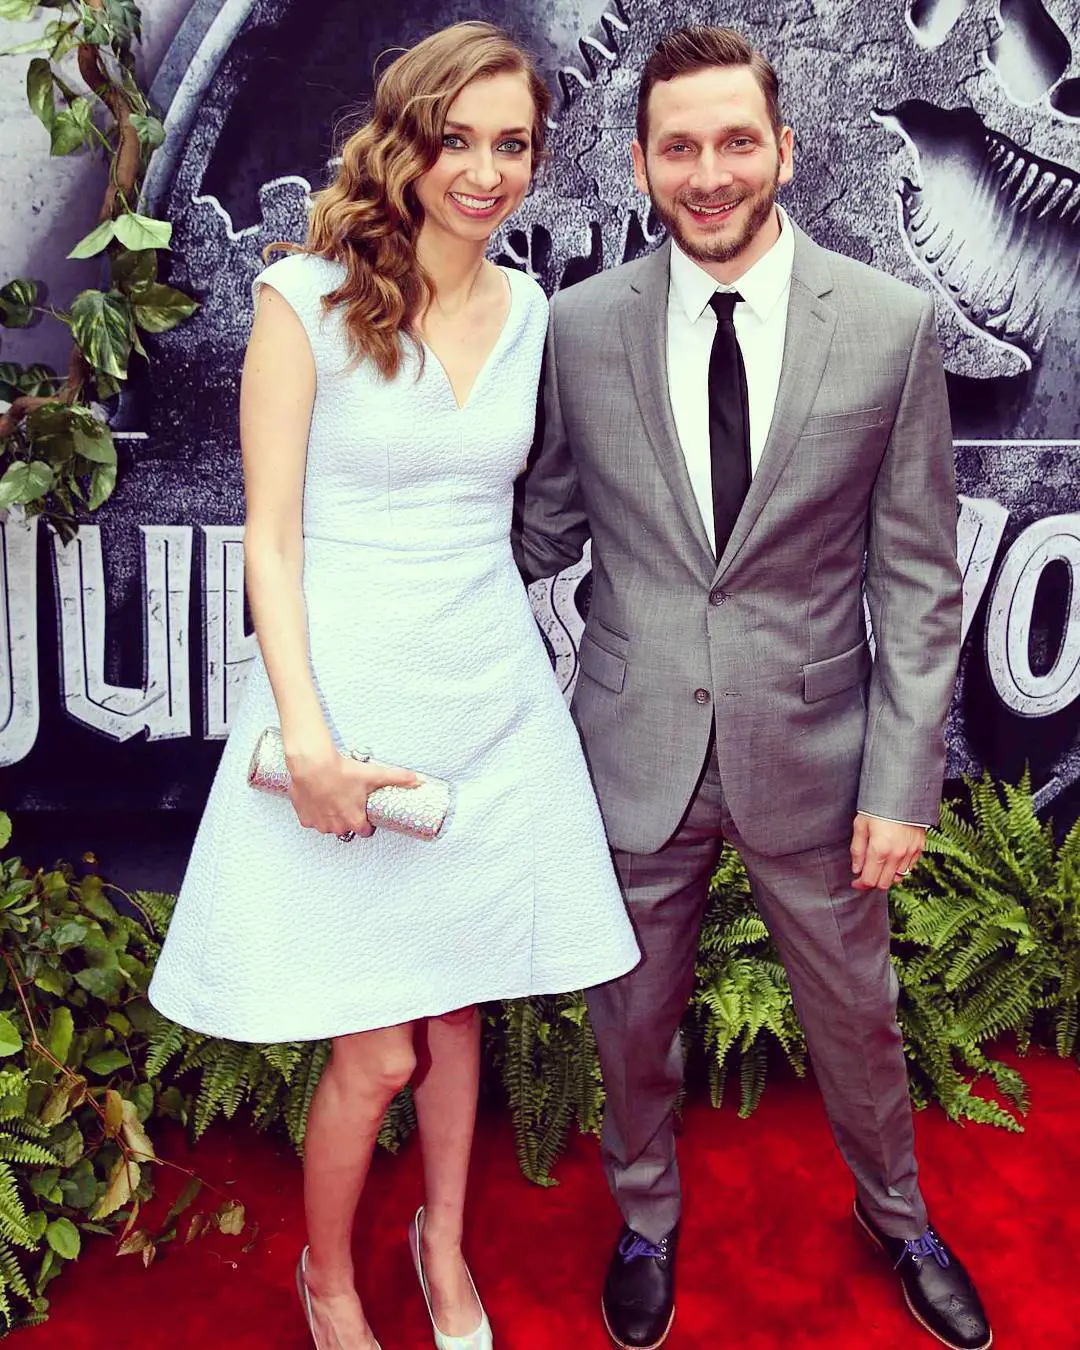 Lauren and Julian at Dolby Theatre during the Jurassic World premiere in 2016